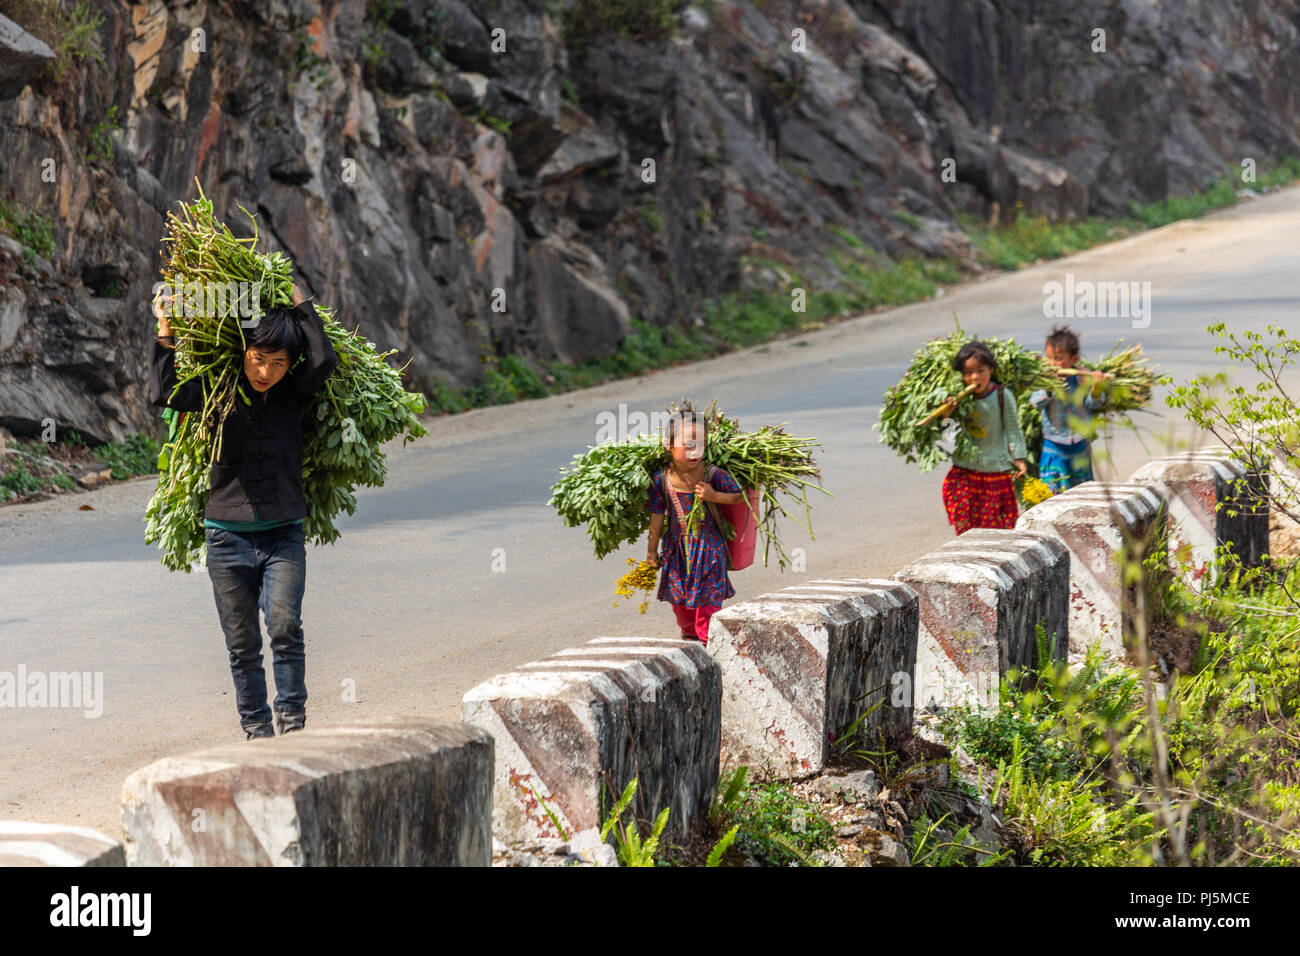 Ha Giang, Vietnam - March 18, 2018: Family with children transporting big loads of plants on a road in northern Vietnam. Child labor is very common in Stock Photo